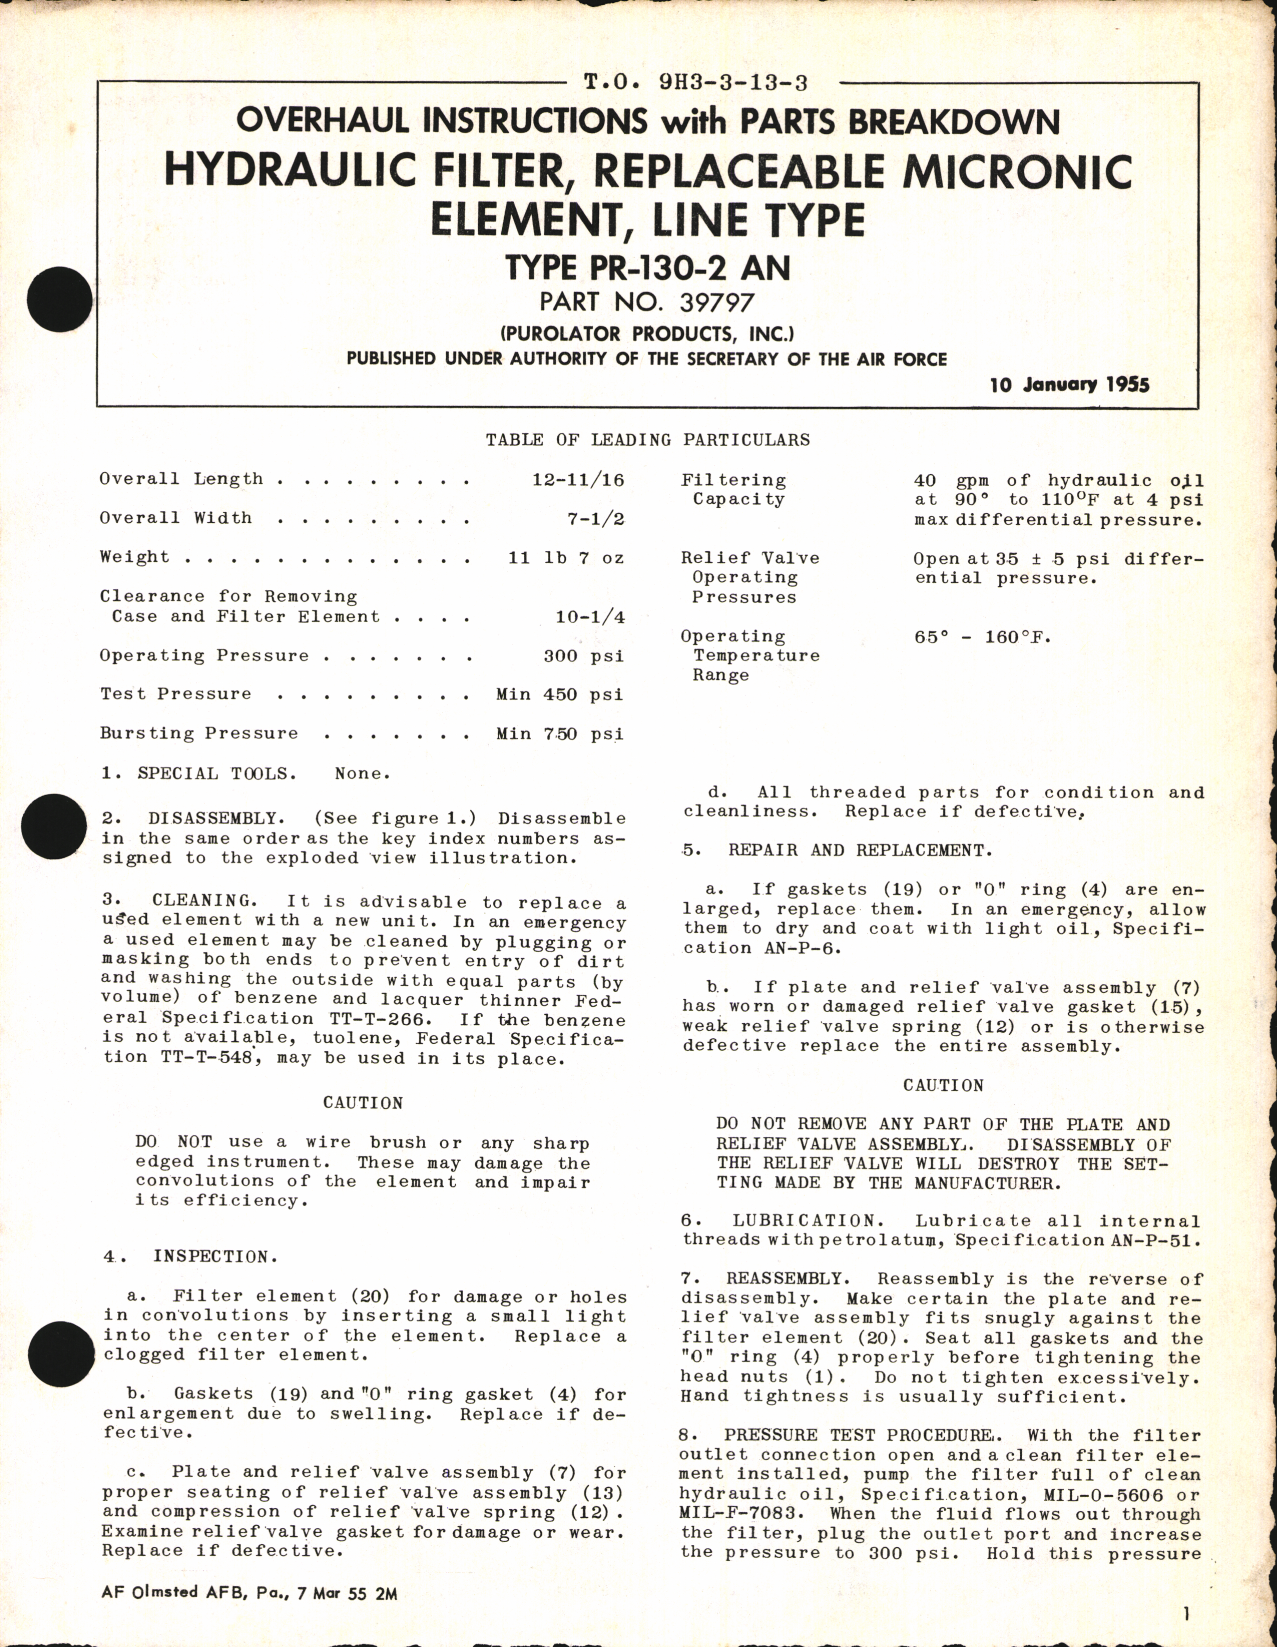 Sample page 1 from AirCorps Library document: Overhaul Instructions with Parts Breakdown for Hydraulic Filter, Replaceable Micronic Element, Line Type, Type PR-130-2 AN Part No. 39797